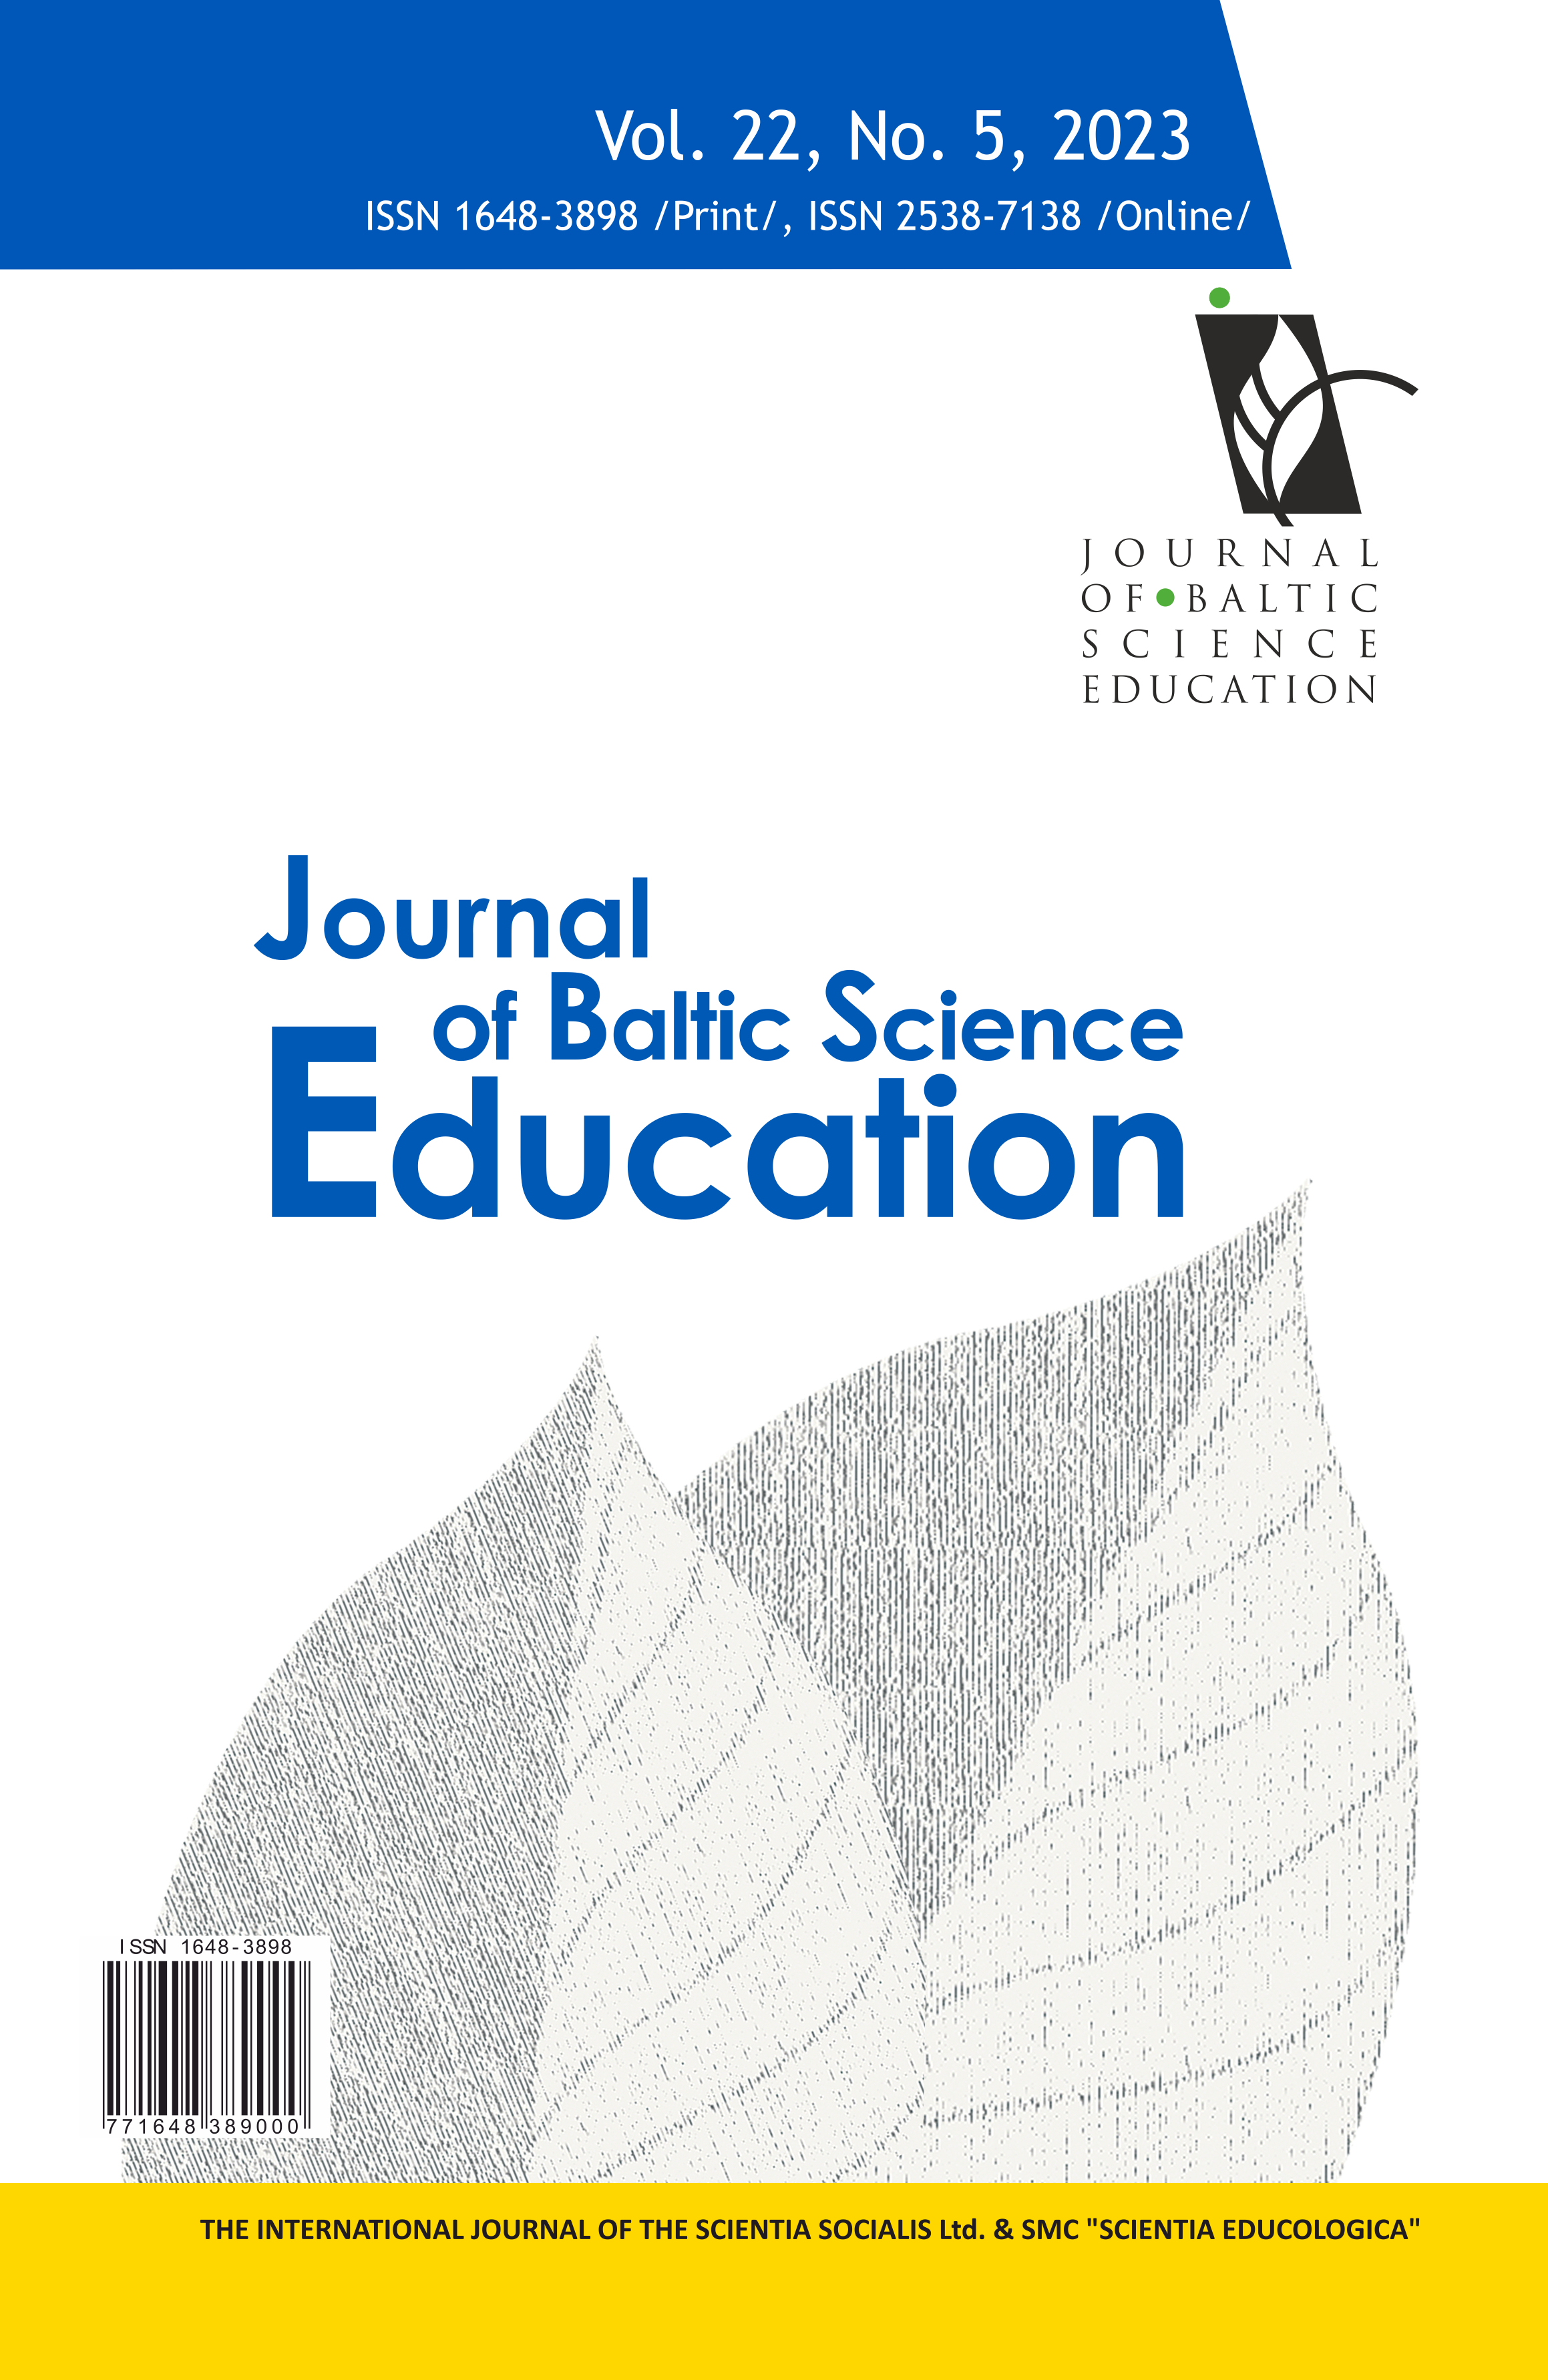 RAISING QUALITY OF PHYSICS EDUCATION: CONTRIBUTION OF JBSE OVER THE PAST ISSUES